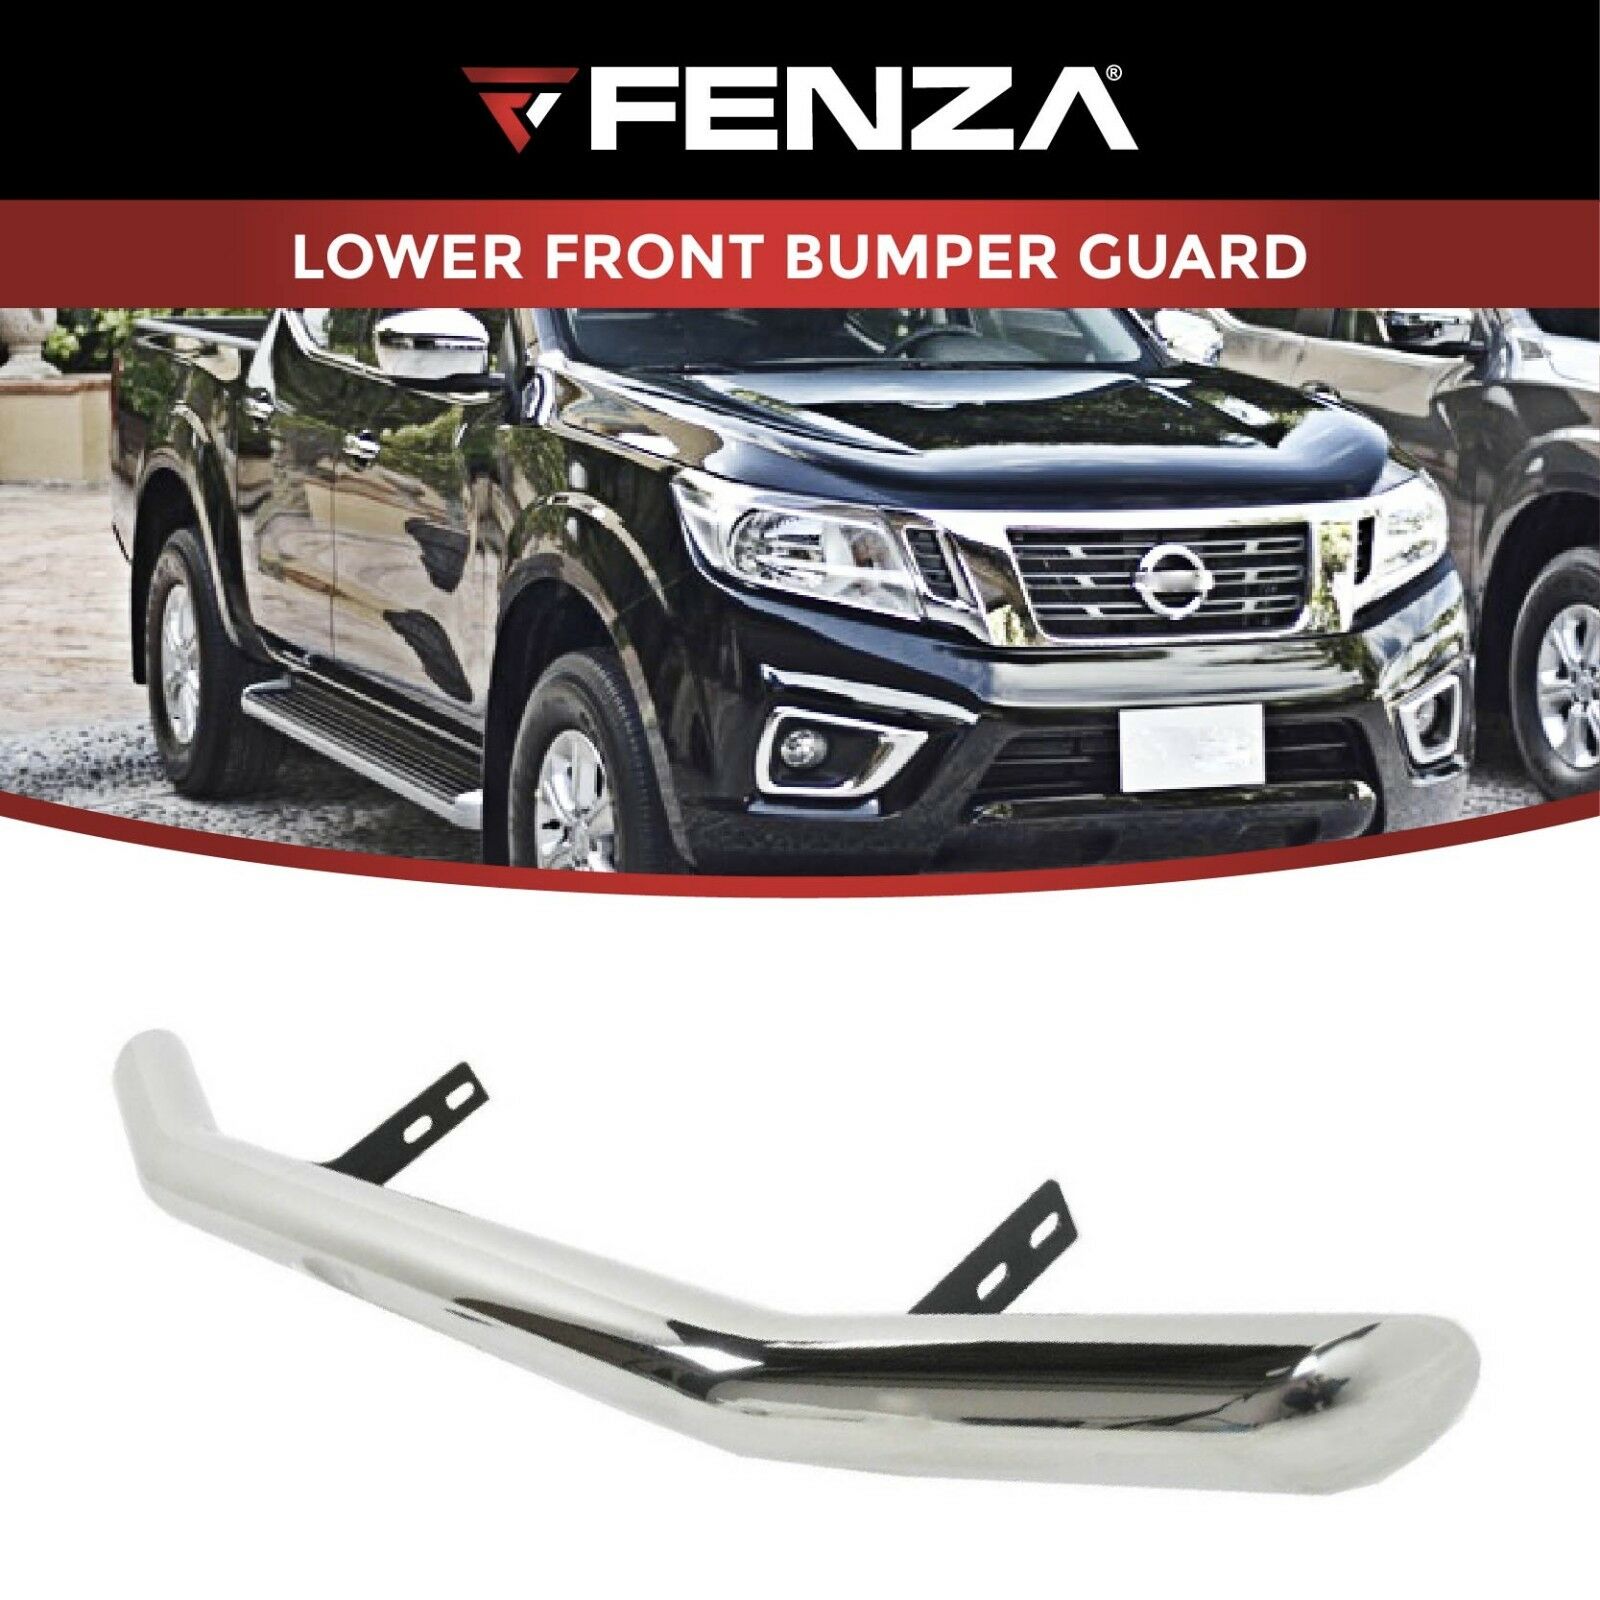 Lower front bumper guard for 2016-2018 Nissan np300 navara/frontier stainless steel